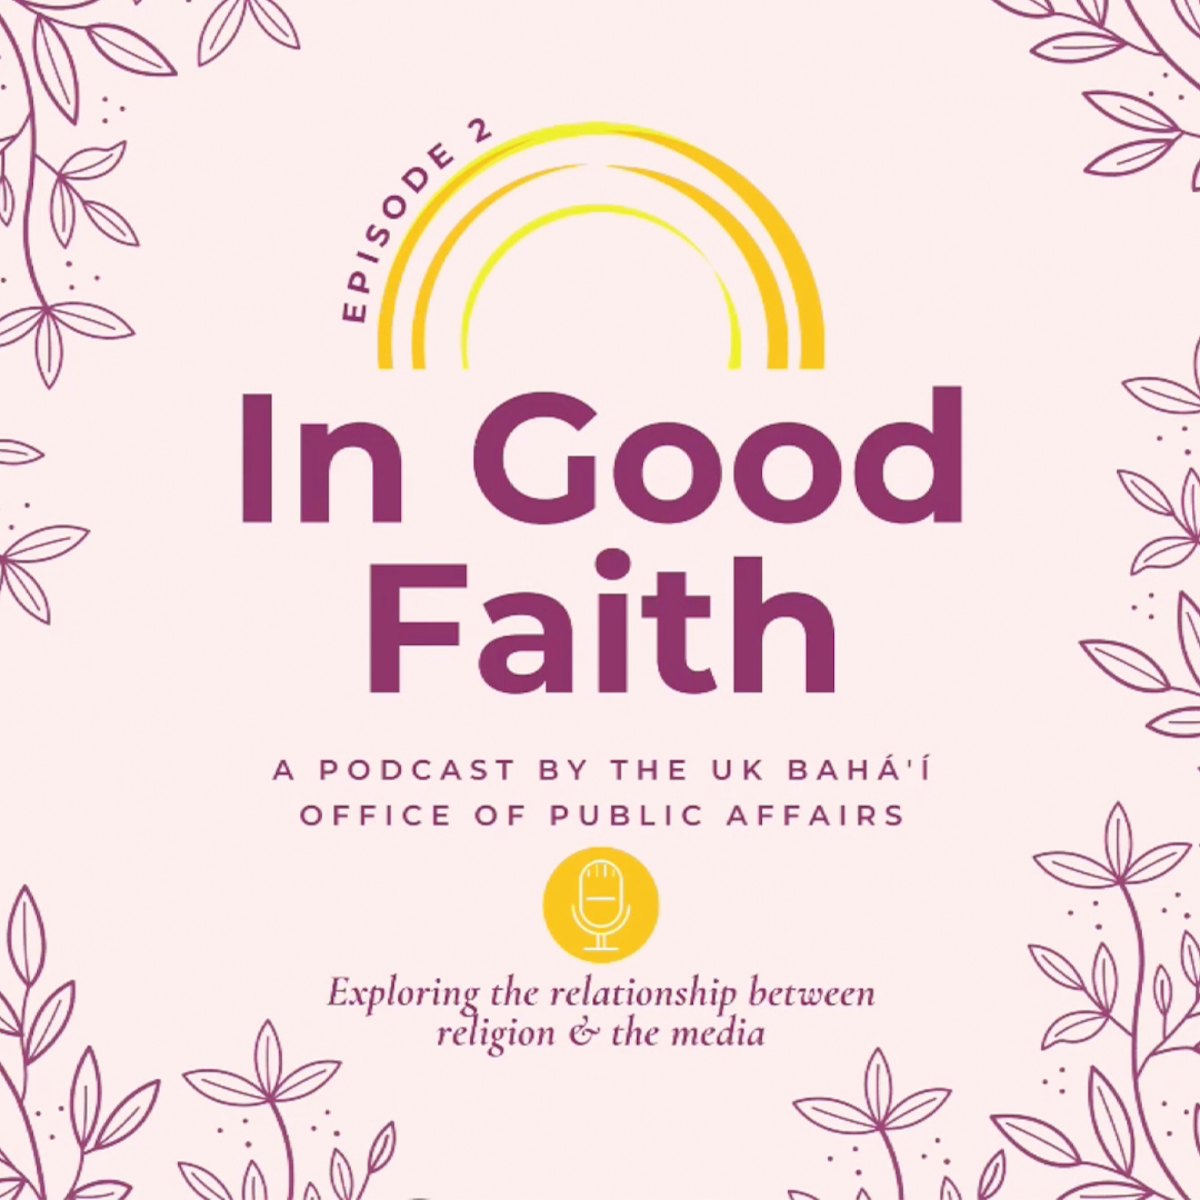 The podcast series “In Good Faith,” produced by the Bahá’í Office of Public Affairs in the UK, invites journalists to profound discussions on how the media can play a constructive role in society.